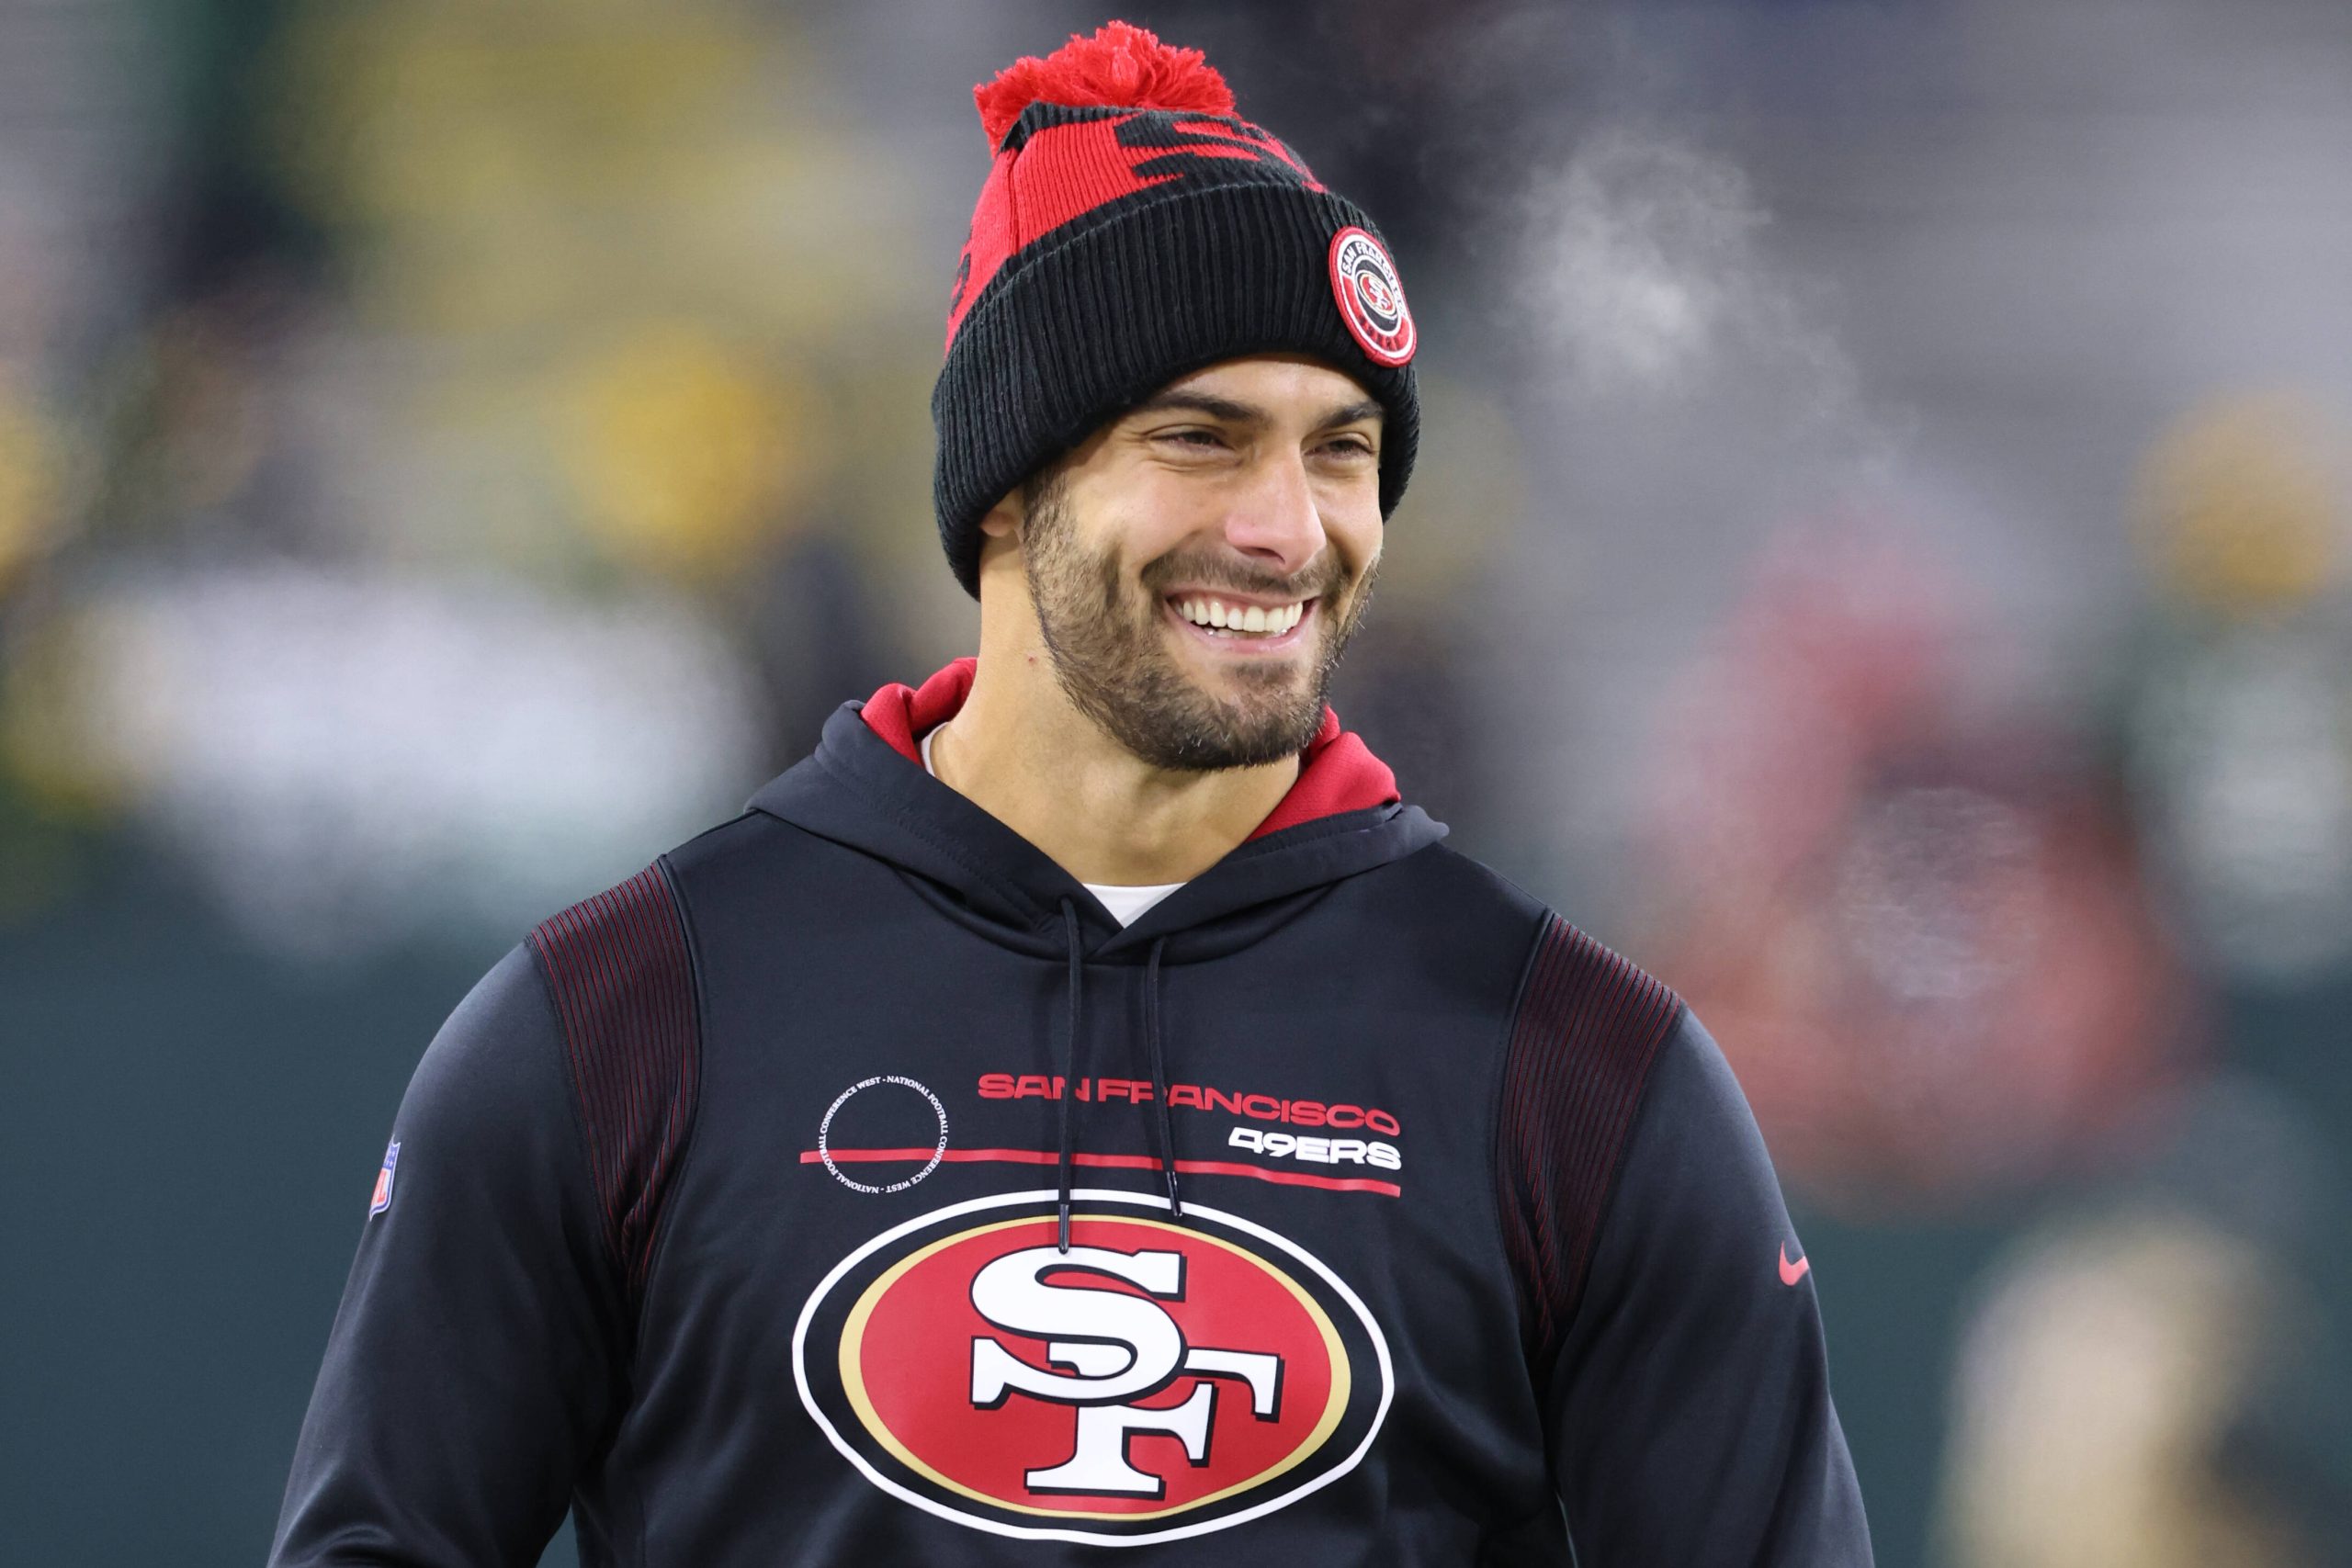 January 22, 2022: San Francisco 49ers quarterback Jimmy Garoppolo 10 during the NFL, American Football Herren, USA divisional playoff football game between the San Francisco 49ers and the Green Bay Packers at Lambeau Field in Green Bay, Wisconsin. /CSM Green Bay United States of America - ZUMAc04_ 20220122_zaf_c04_452 Copyright: xDarrenxLeex